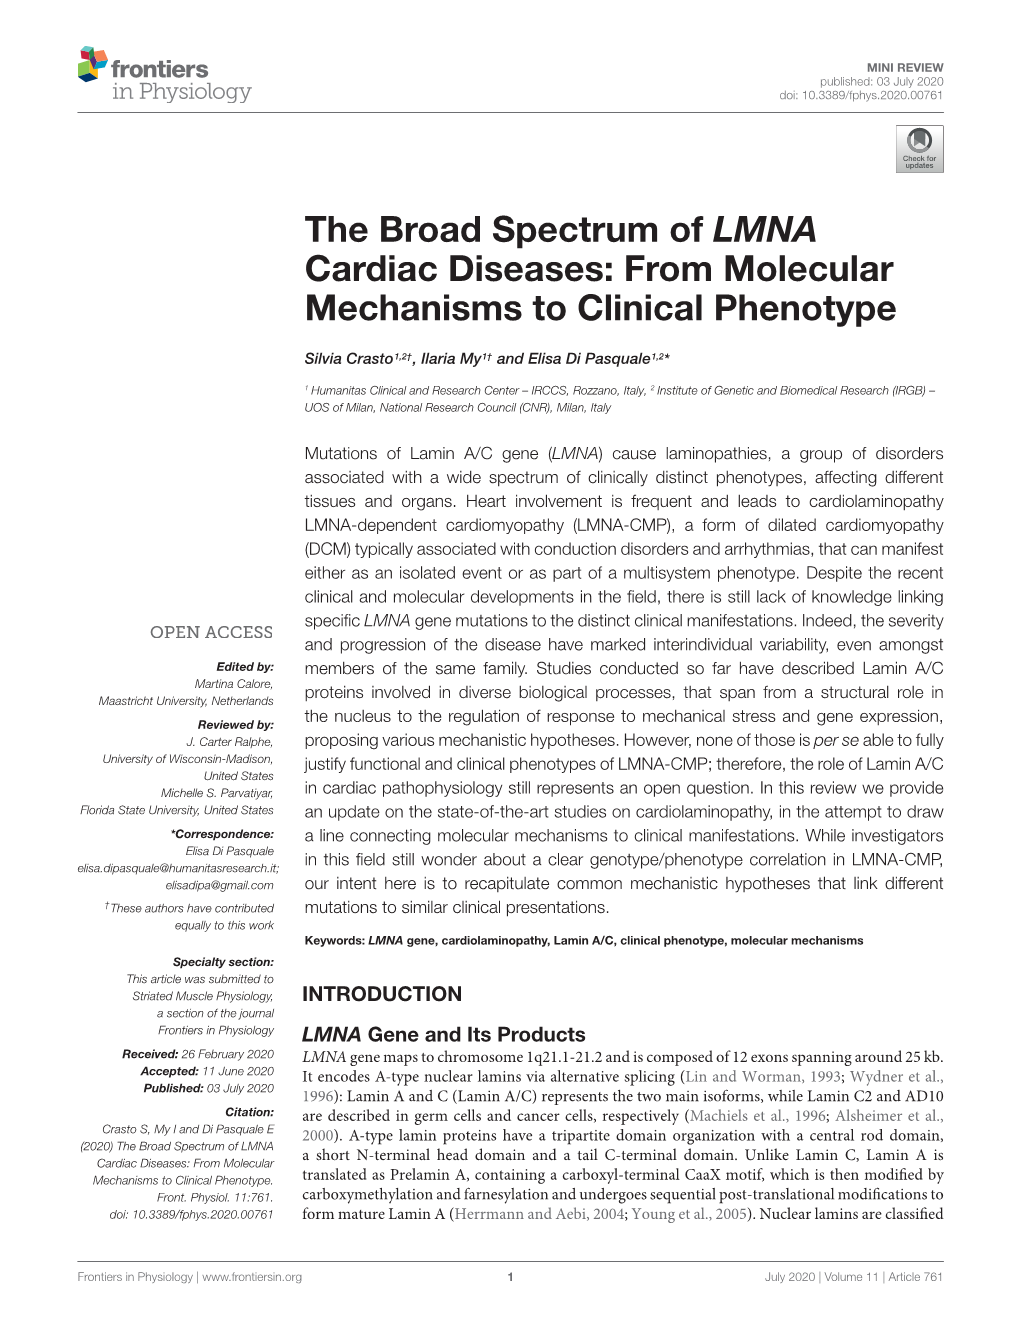 The Broad Spectrum of LMNA Cardiac Diseases: from Molecular Mechanisms to Clinical Phenotype